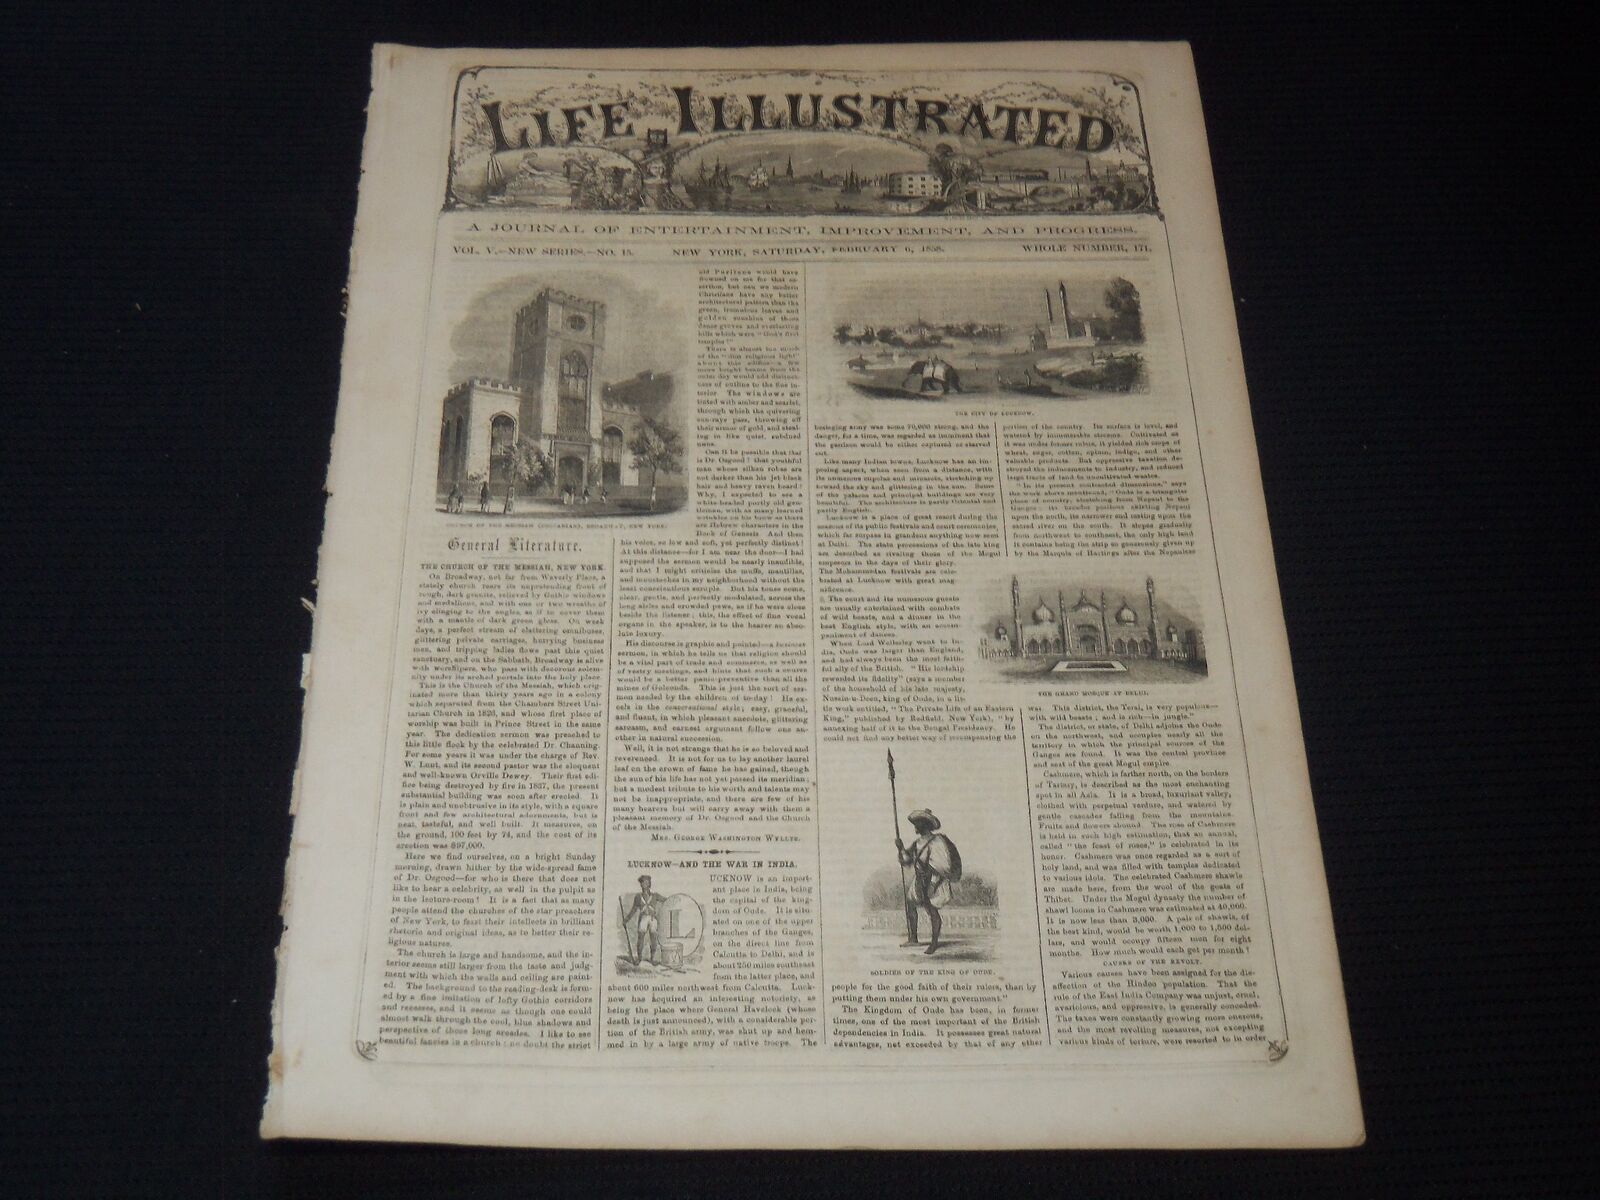 1858 FEBRUARY 6 LIFE ILLUSTRATED NEWSPAPER - CHURCH OF MESSIAN NEW YORK- NP 5899